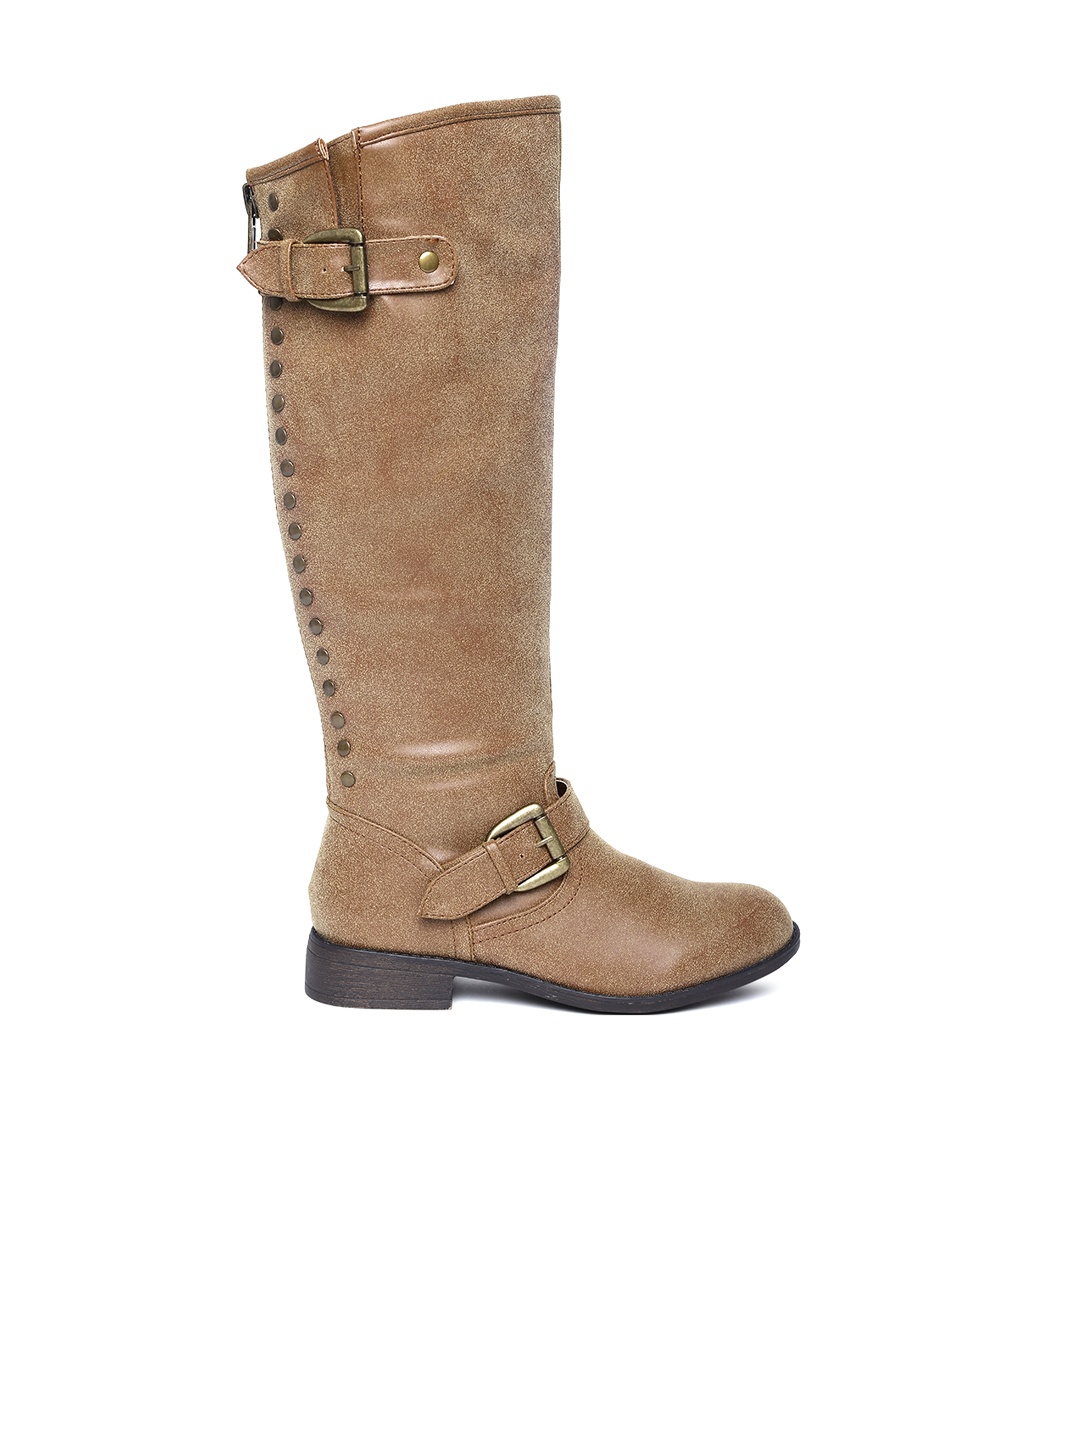 ... boots view product details more casual shoes by steve madden more